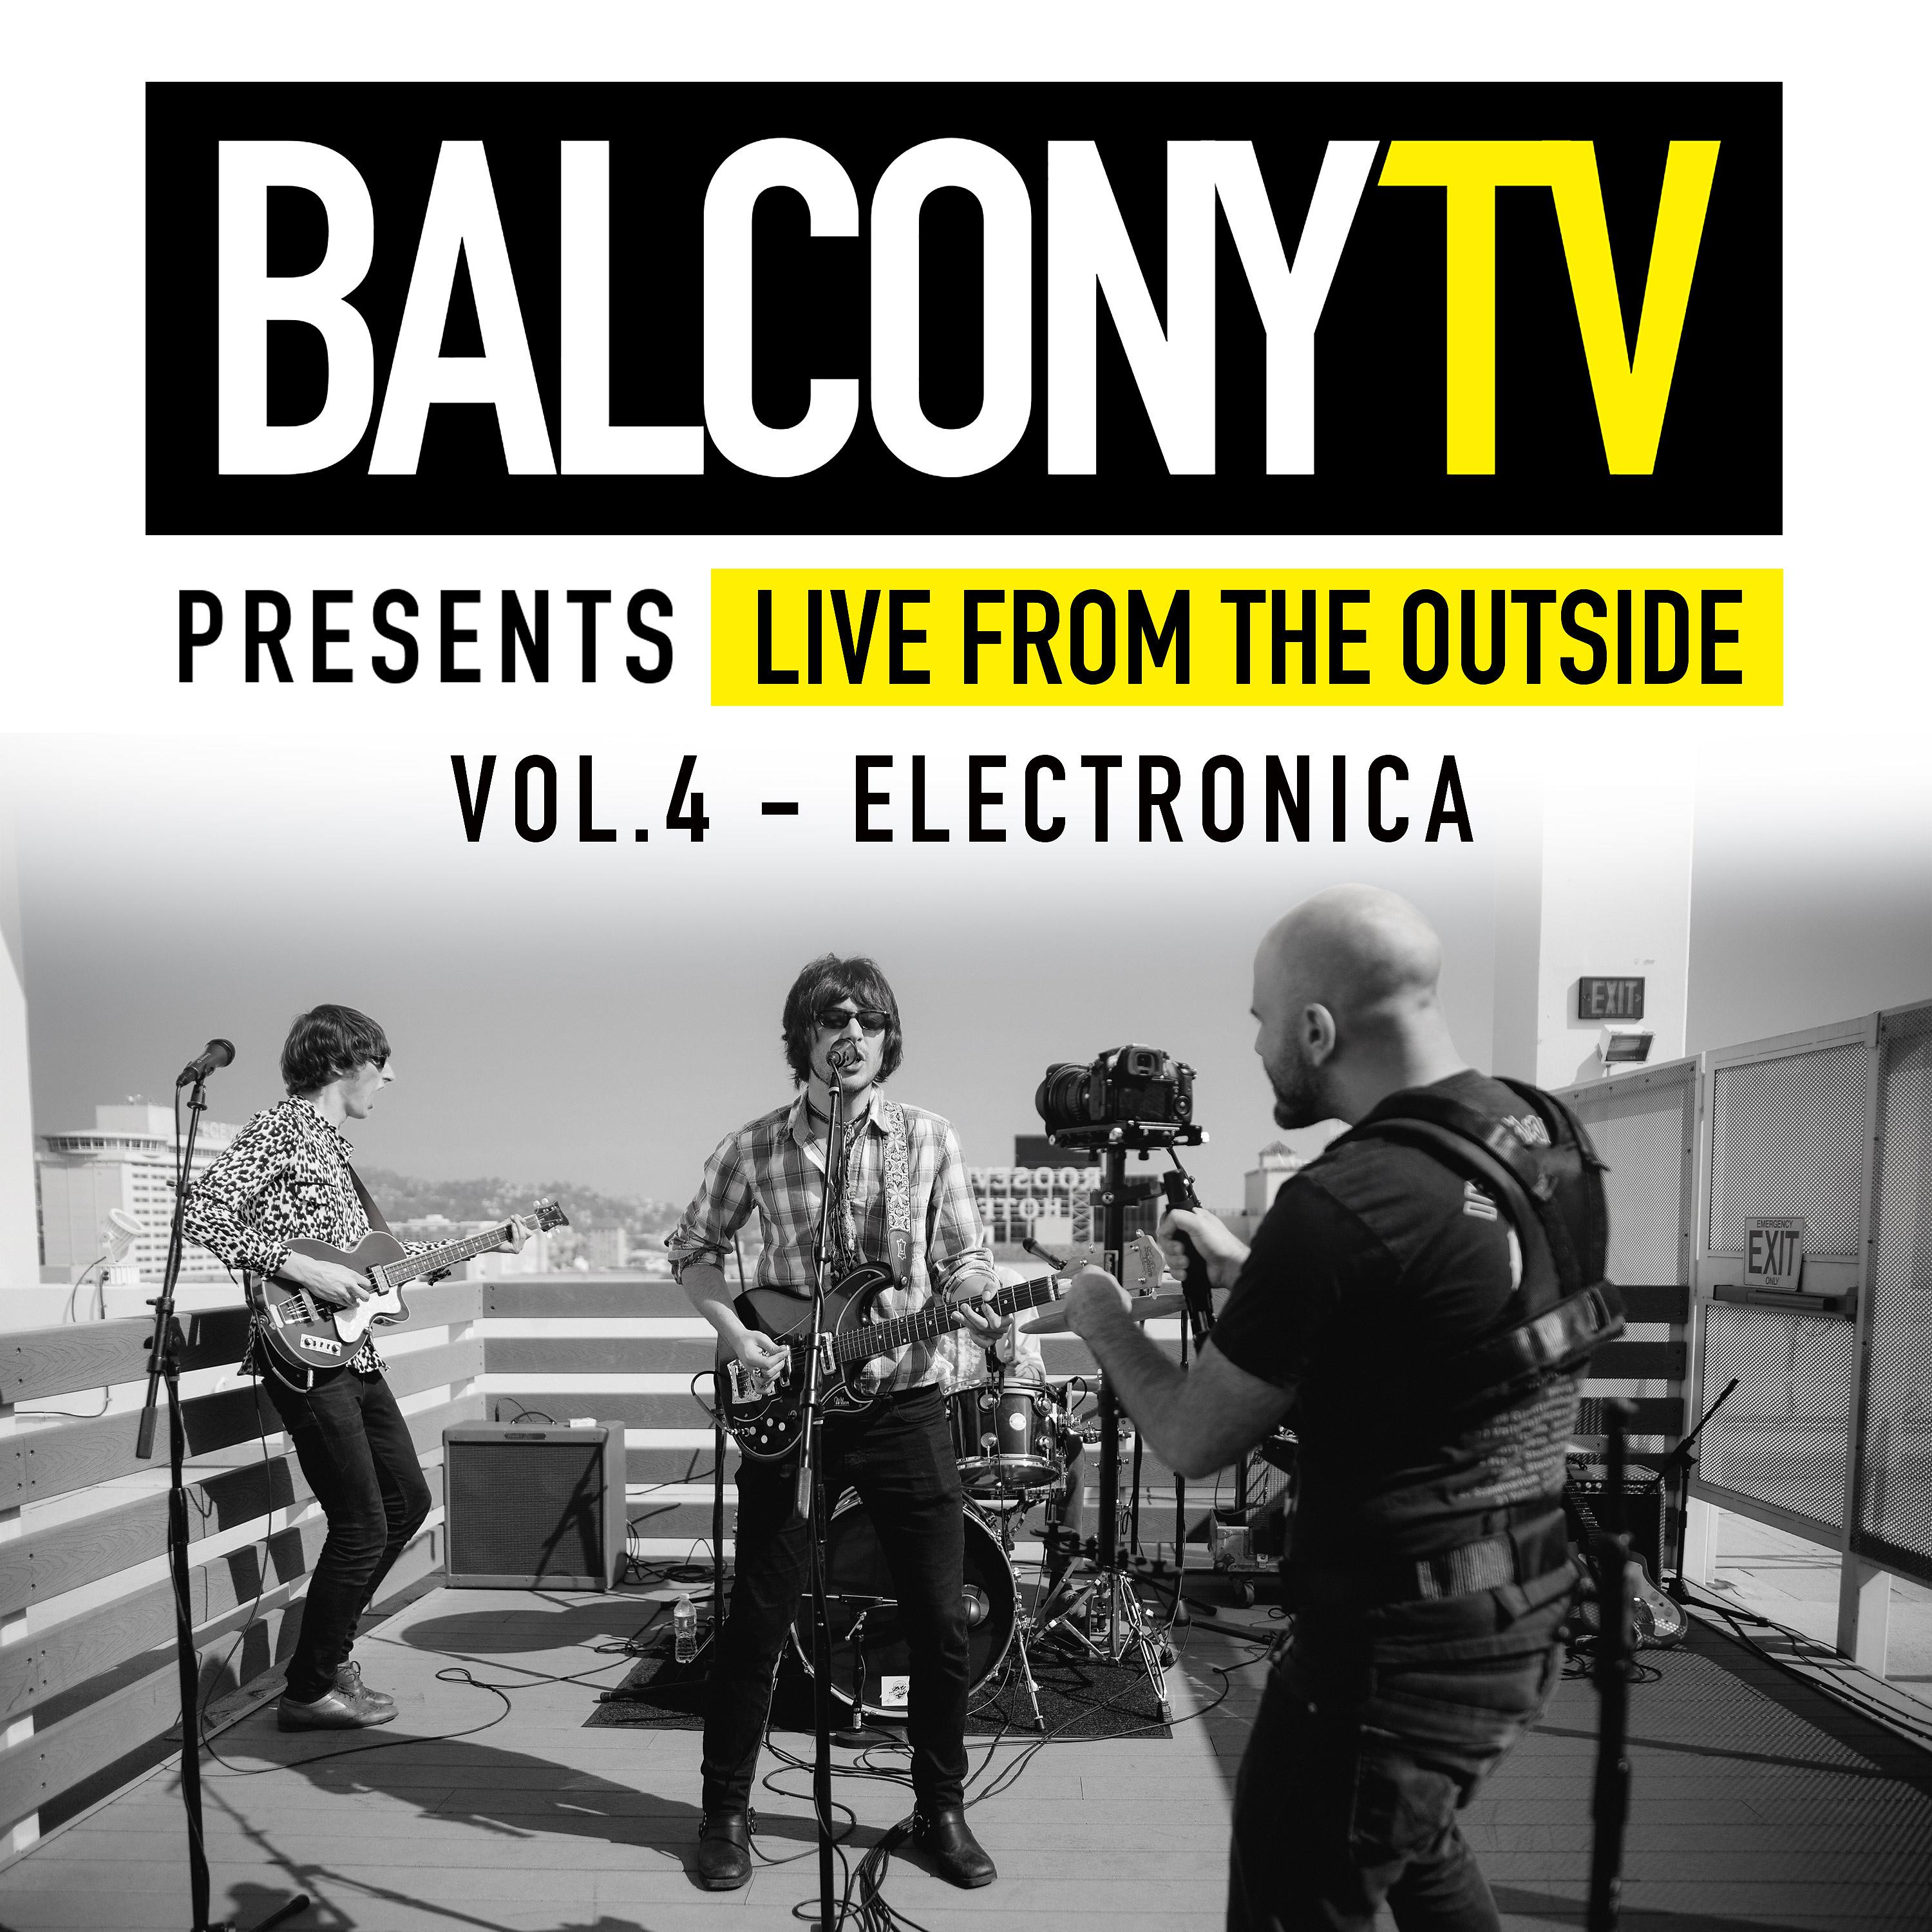 Постер альбома Balconytv Presents: Live from the Outside, Vol. 4 - Electronica